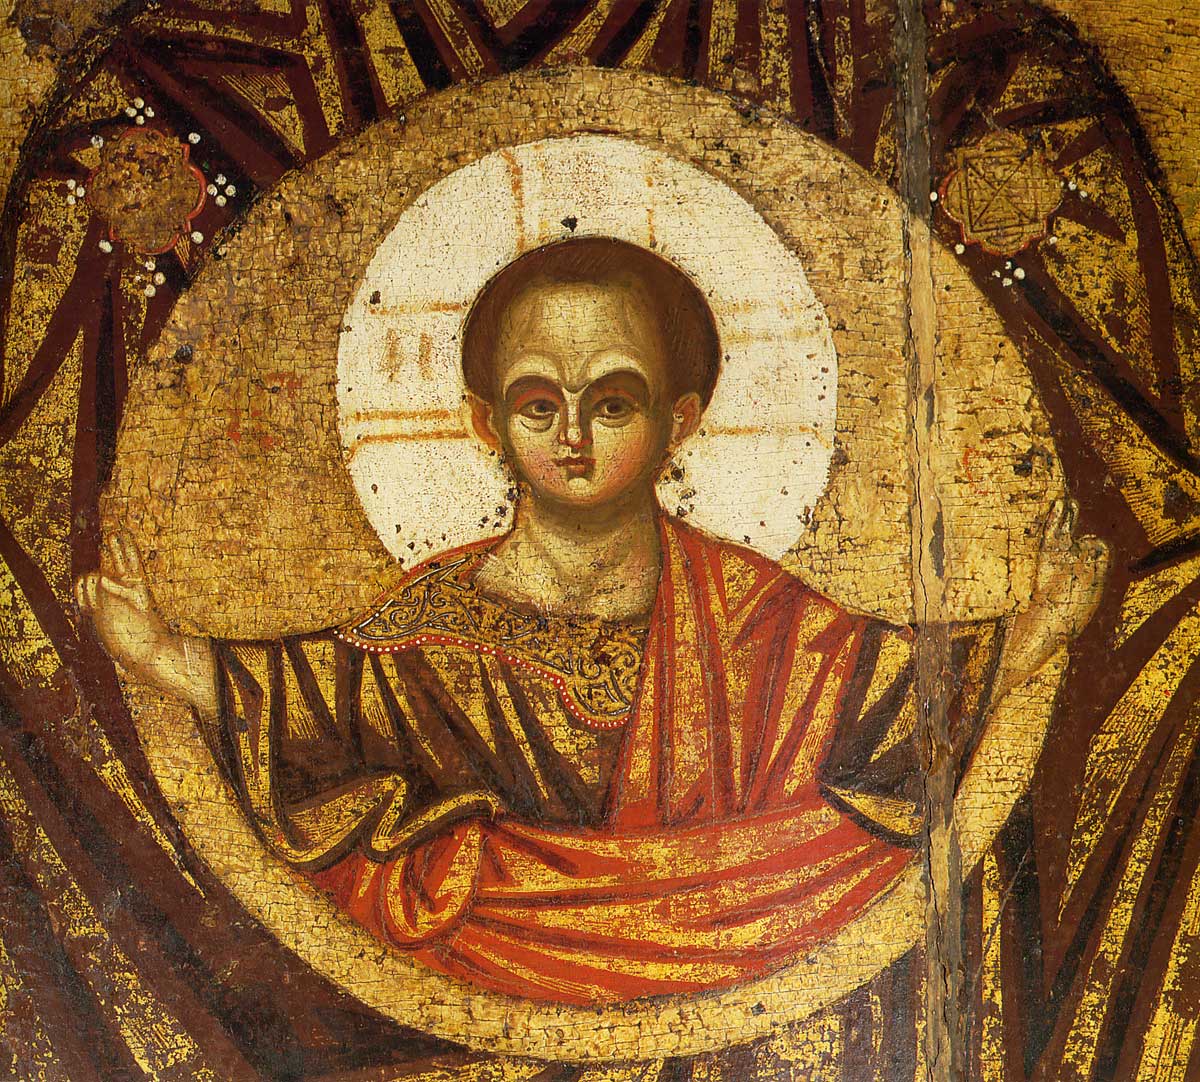 Christ Emmanuel. Theotokos - Great Panagia. The icon from Spas-Transfiguration Cathedral of the Spas-Transfiguration Monastery in Yaroslavl. XII or the first third of the XIII century.